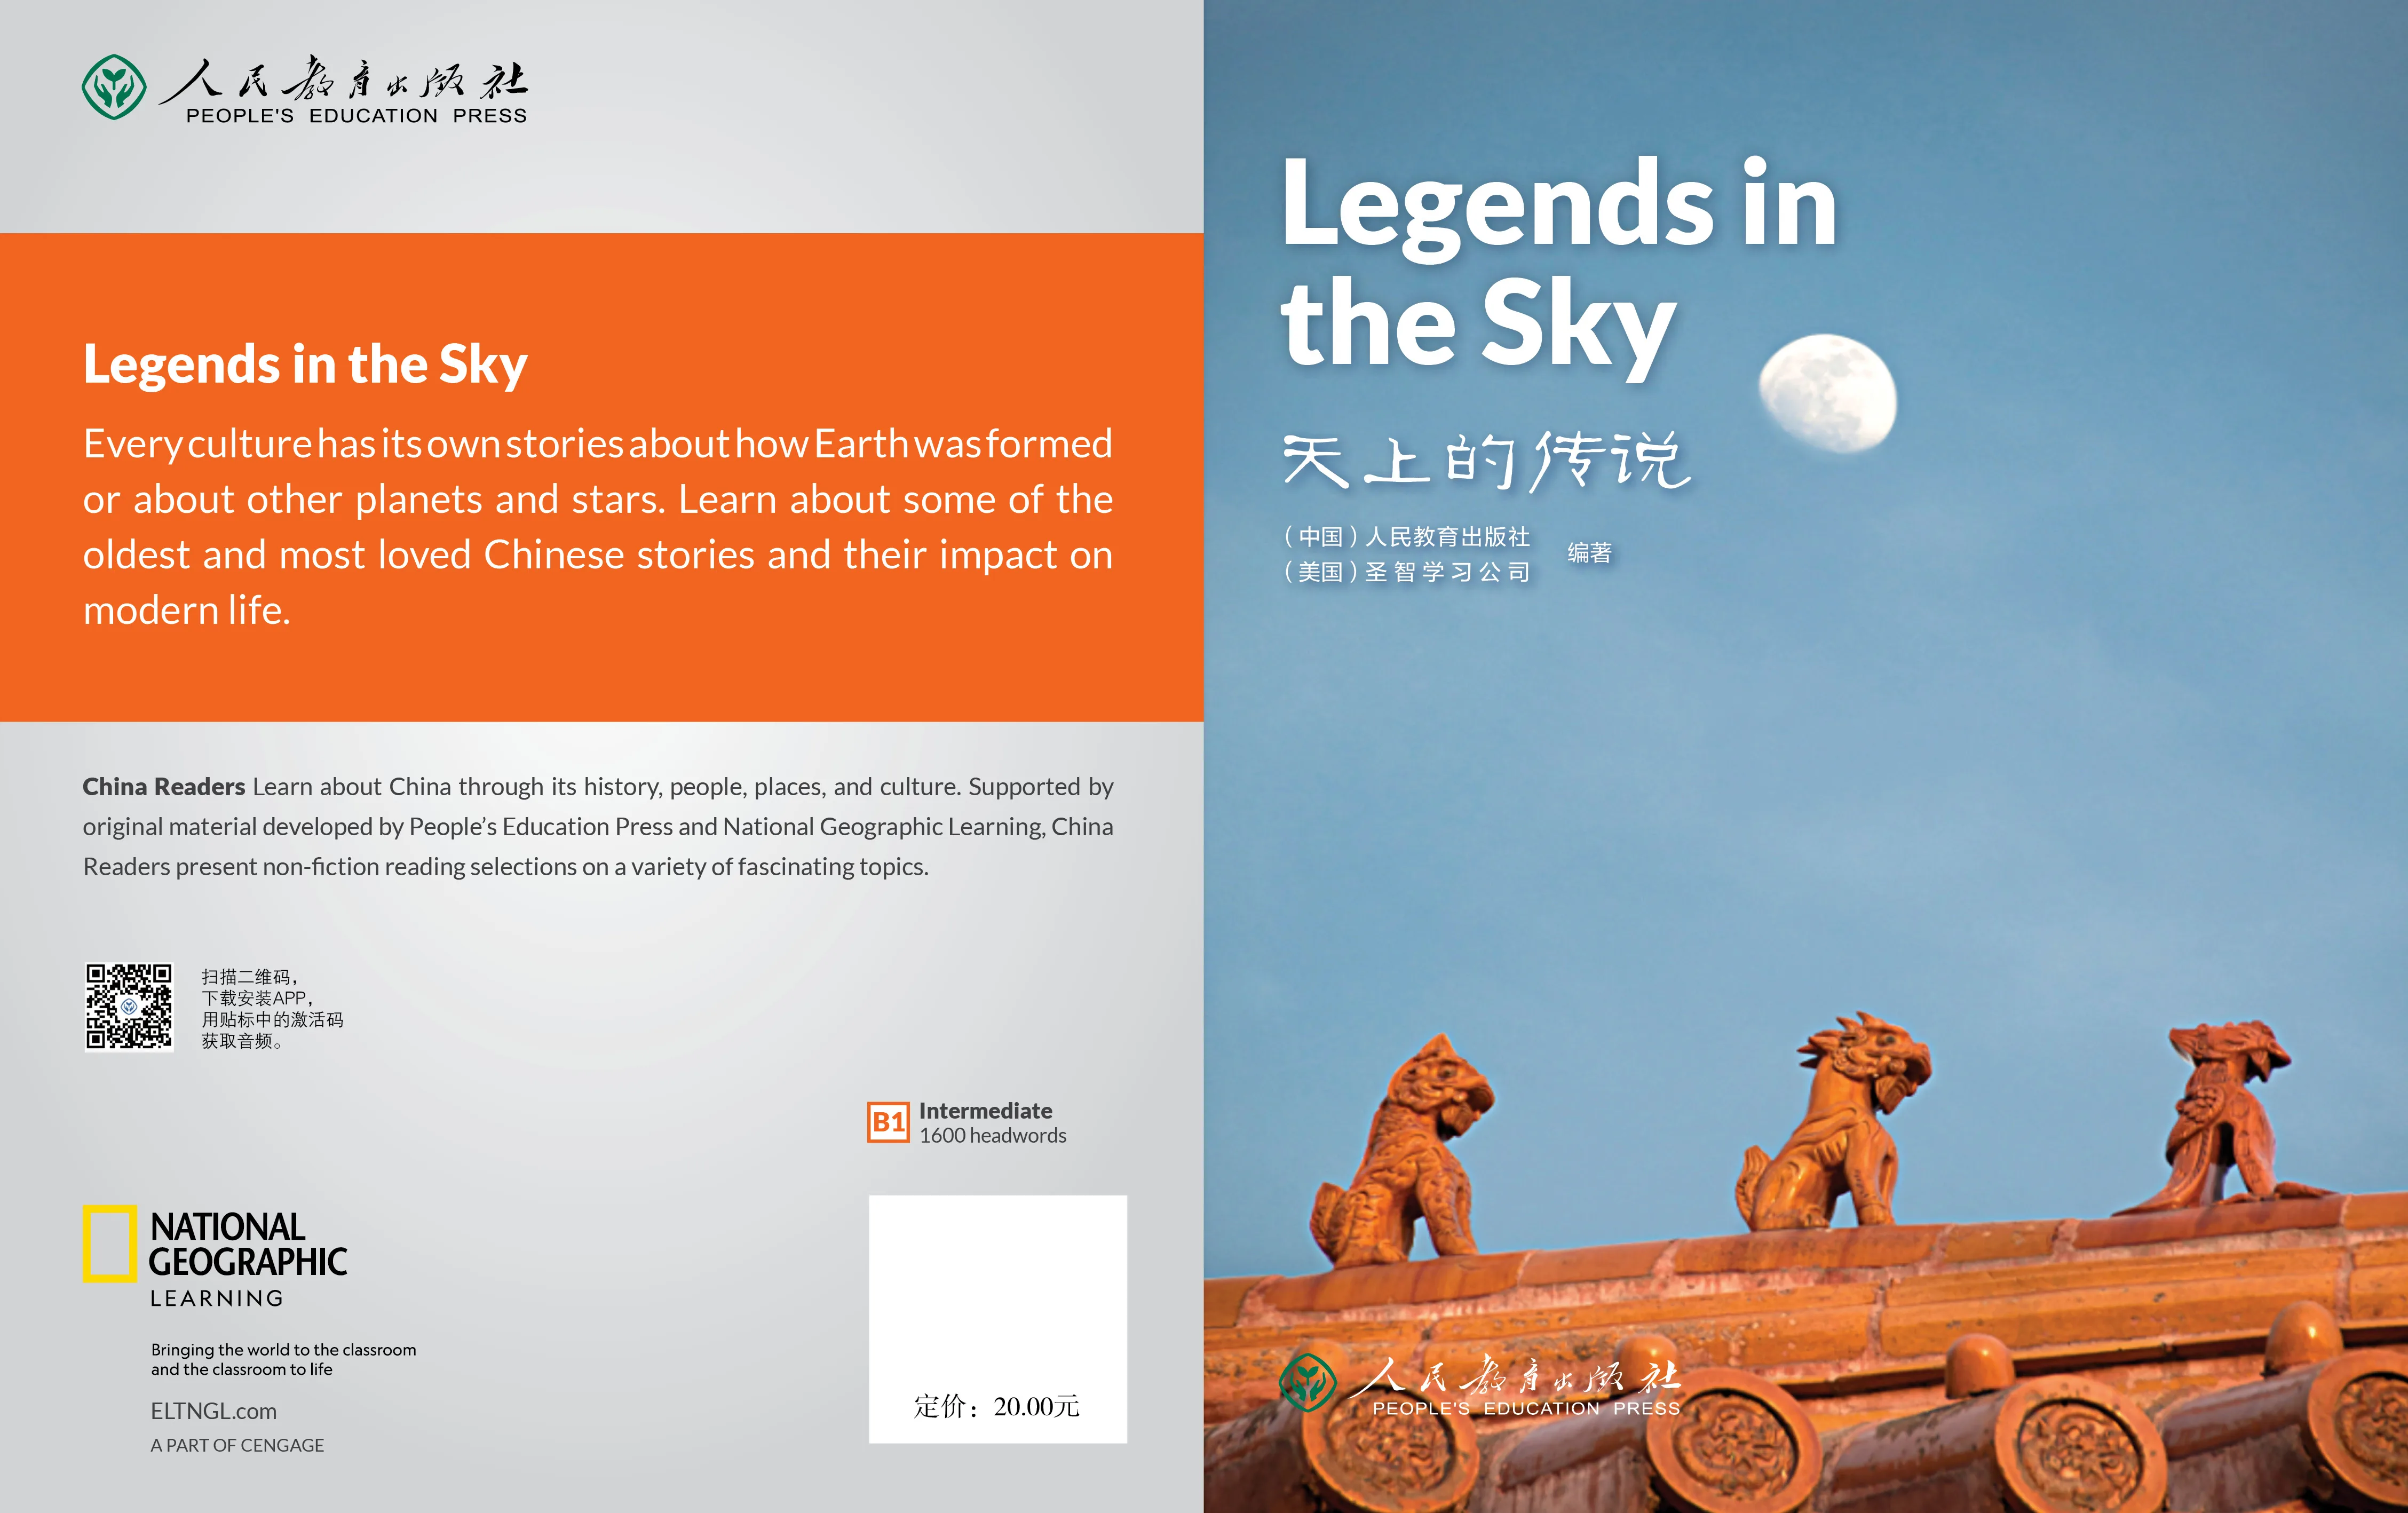 Legends in the Sky